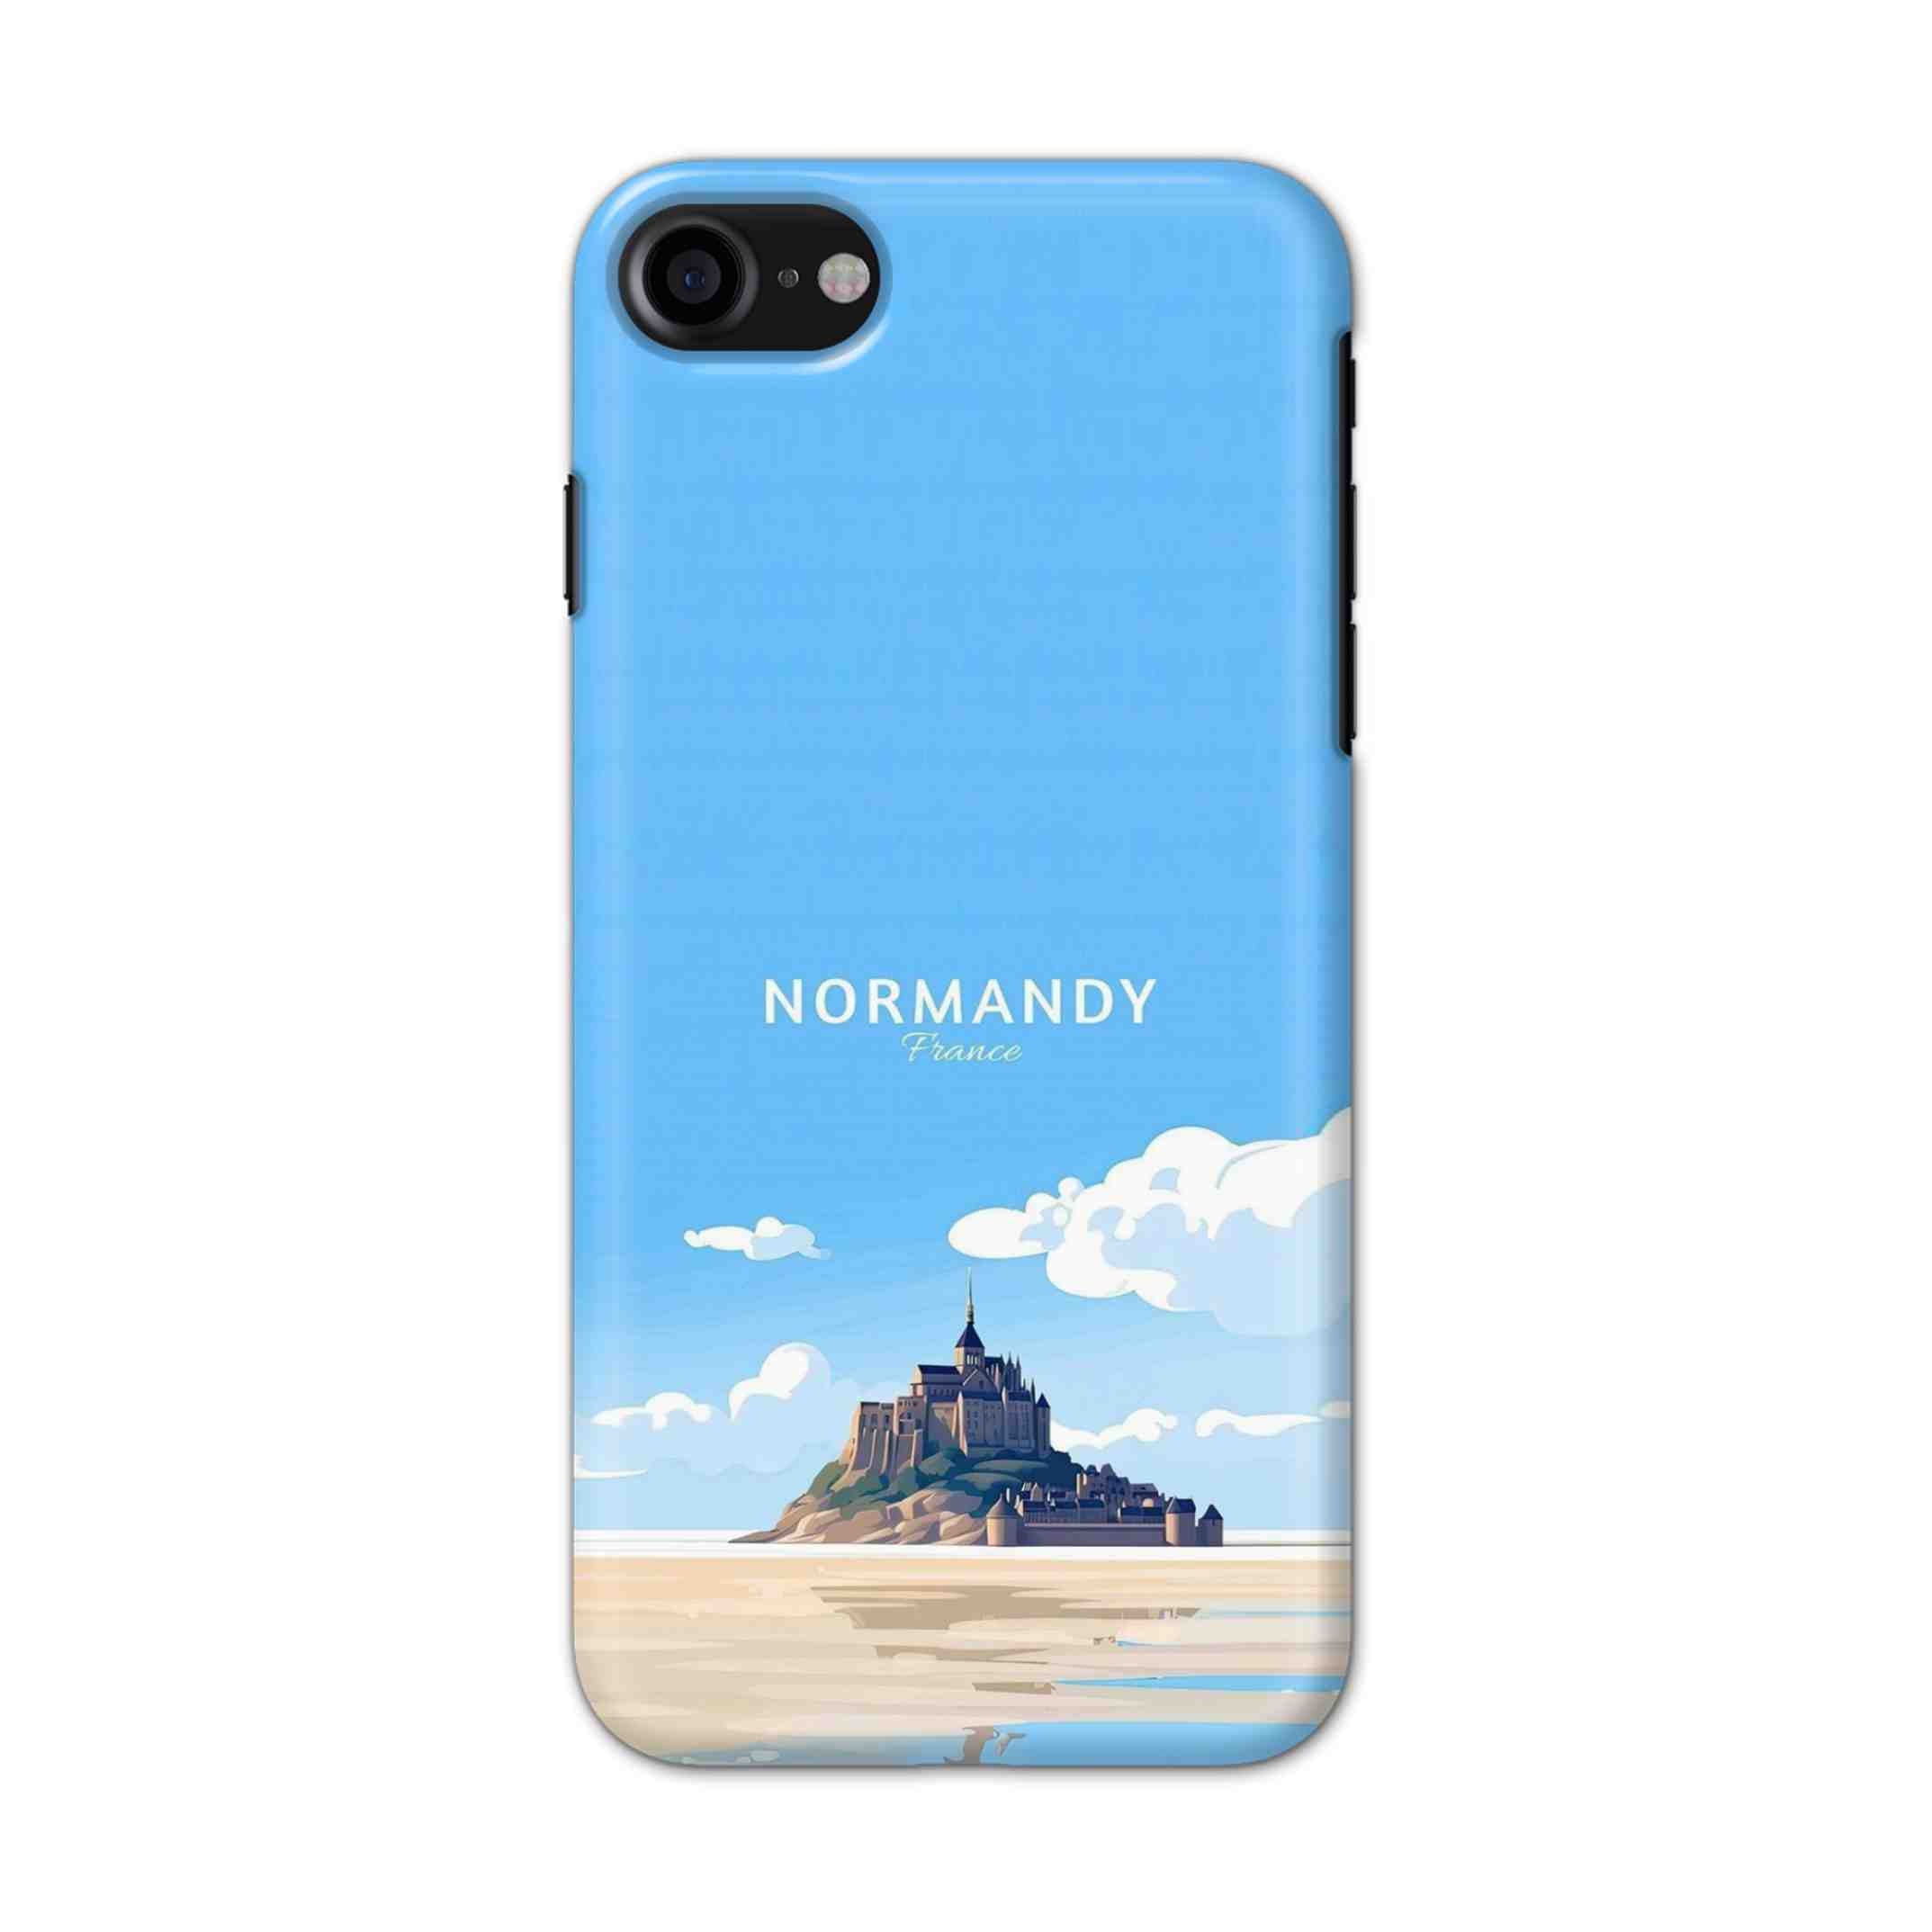 Buy Normandy Hard Back Mobile Phone Case/Cover For iPhone 7 / 8 Online